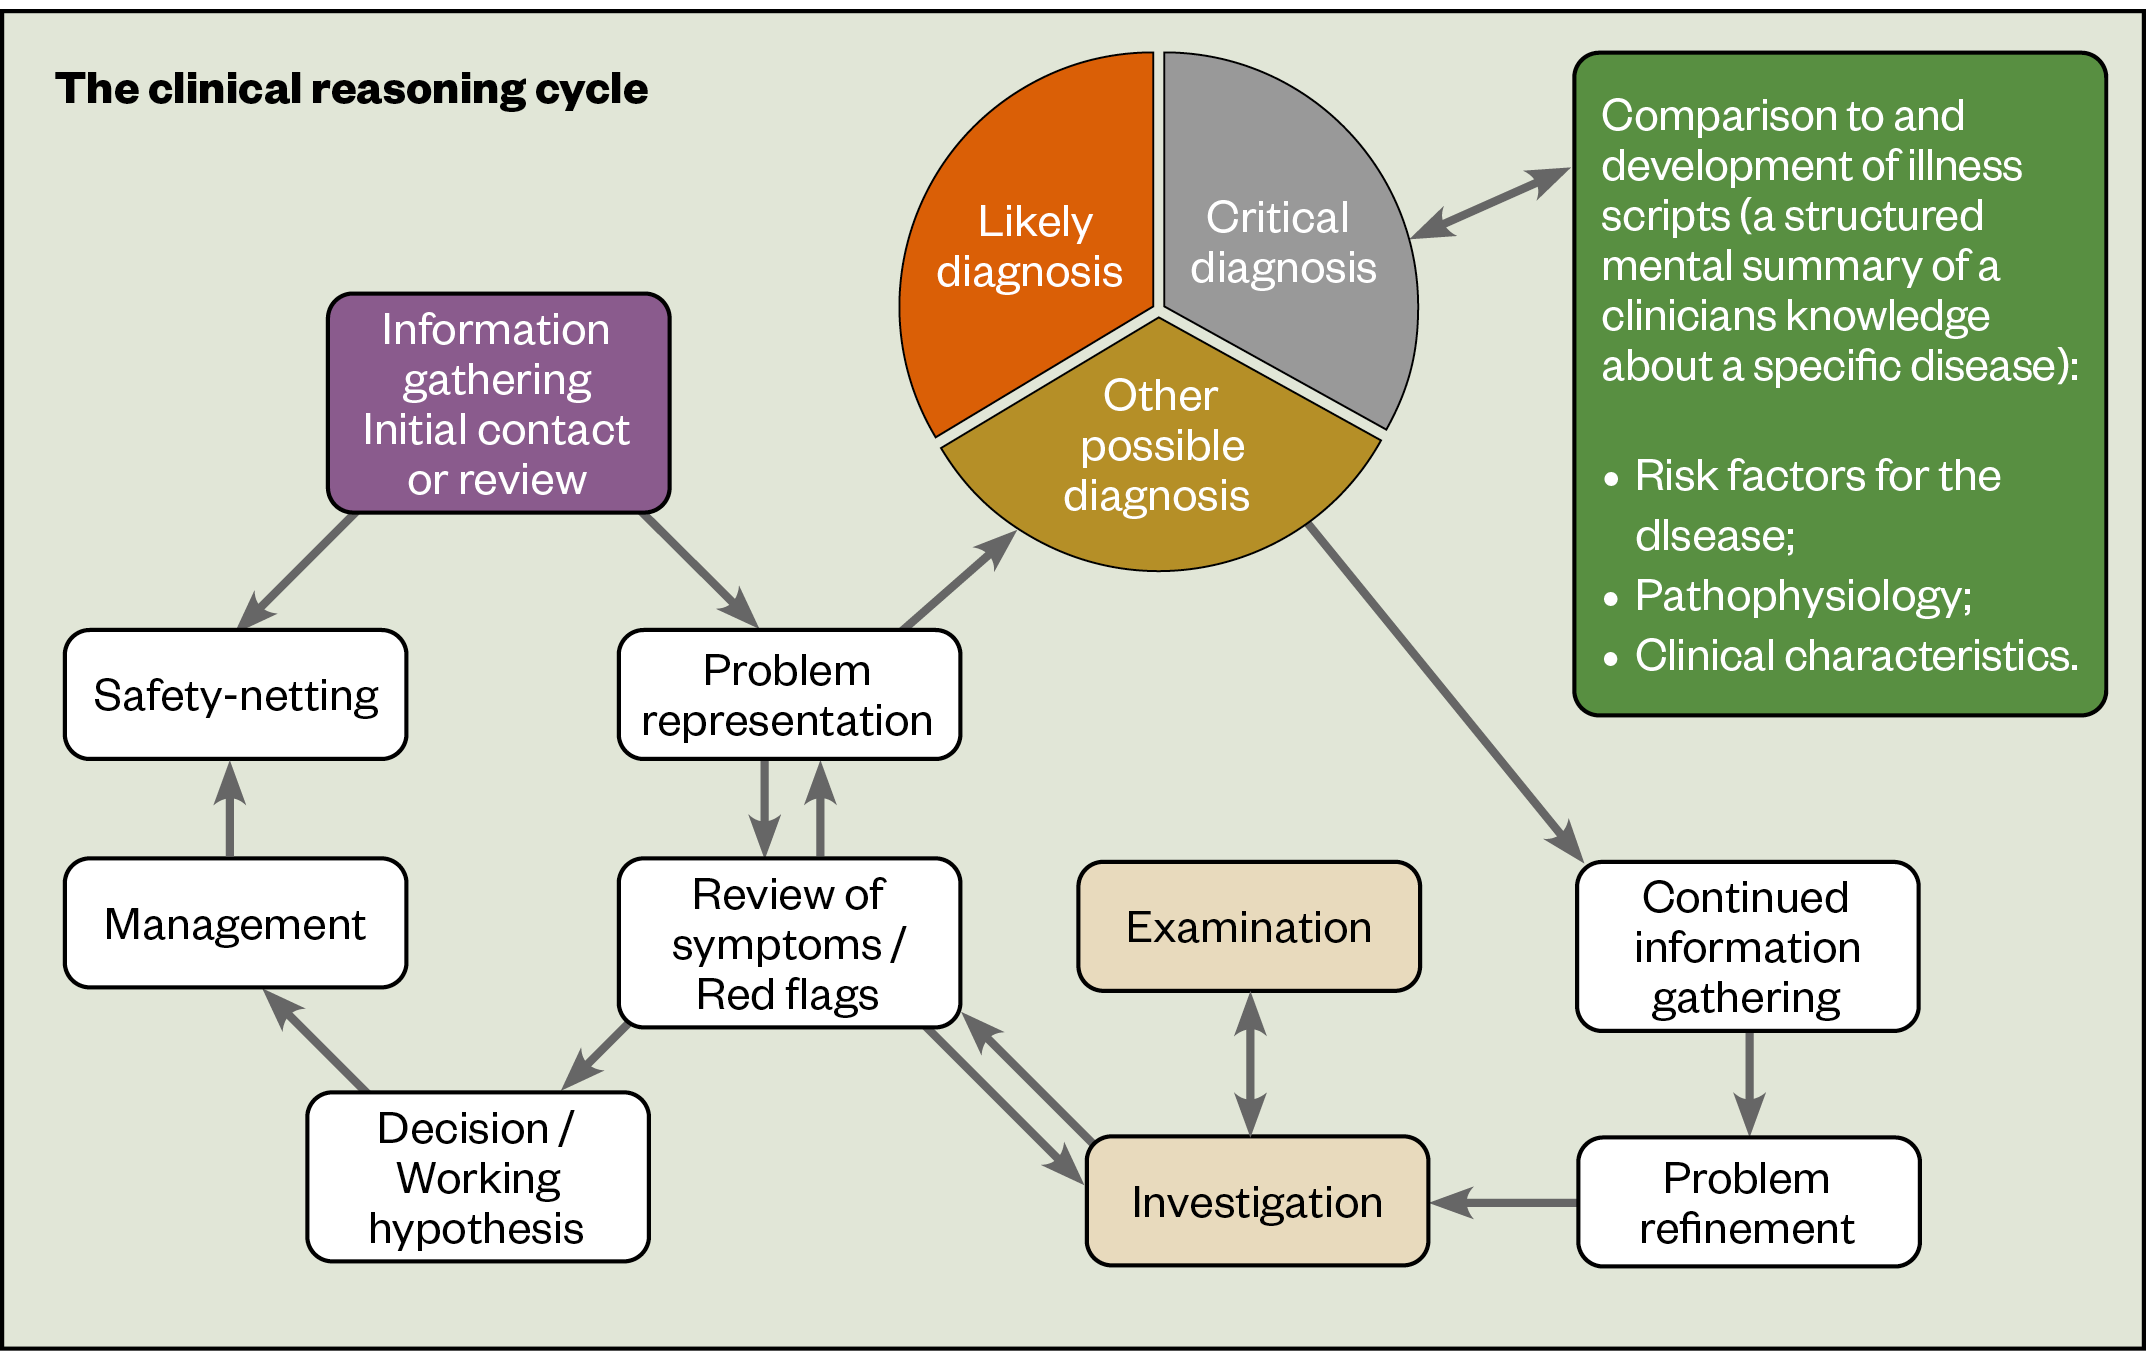 Figure: The clinical reasoning cycle